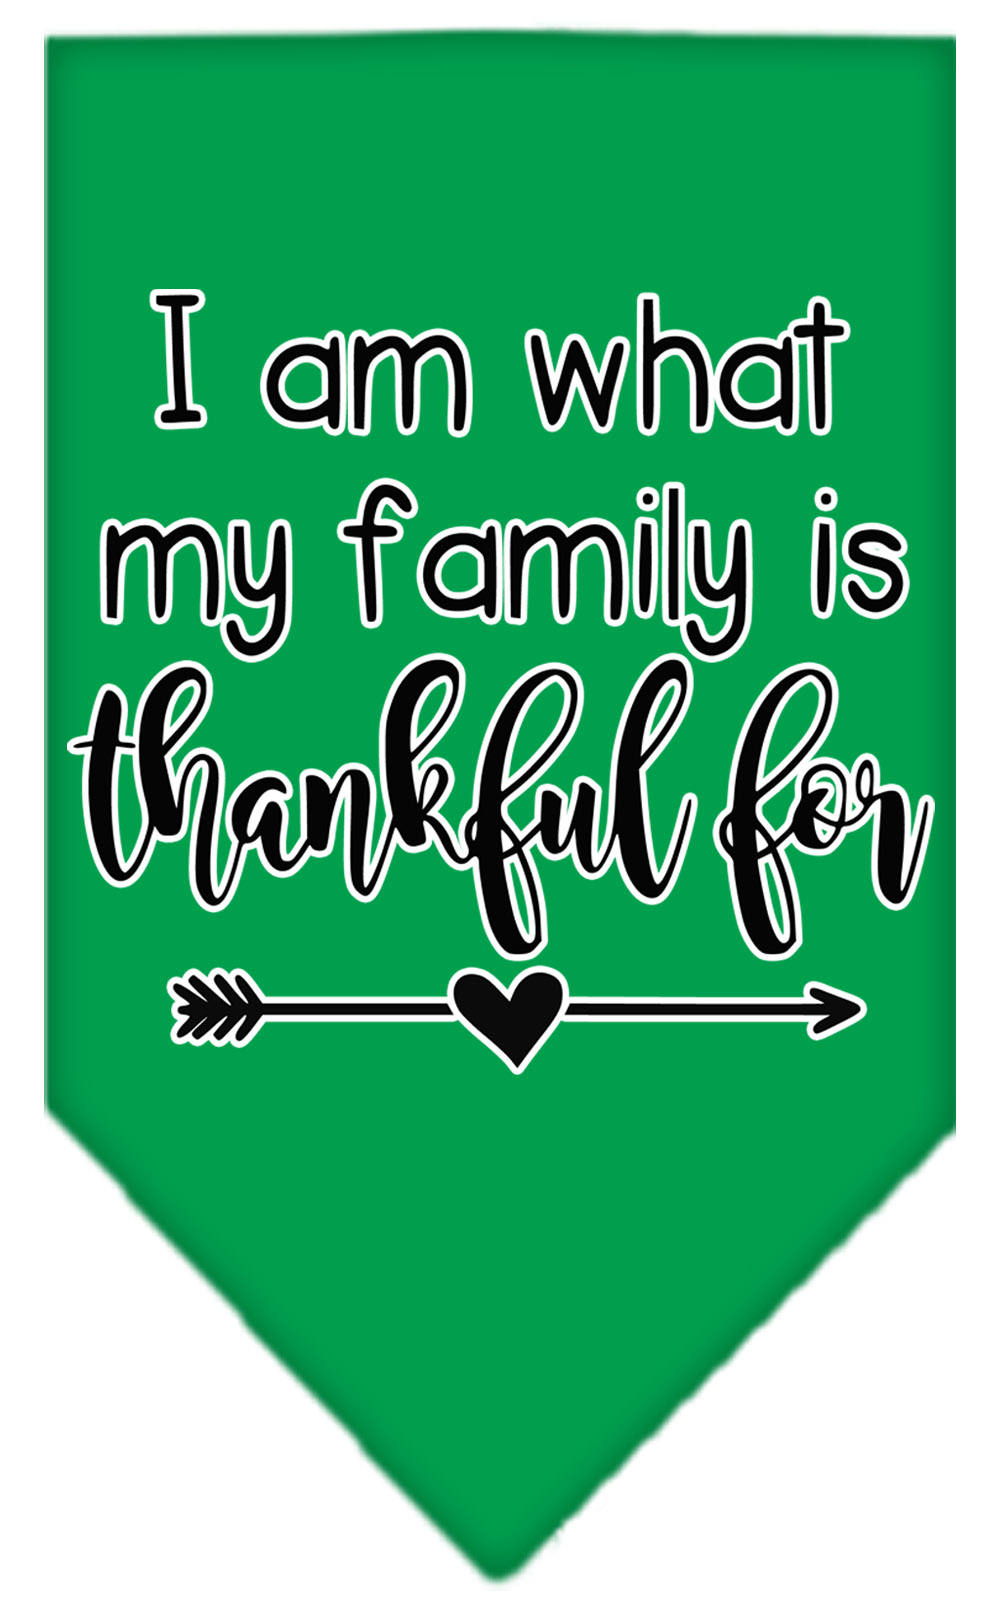 I Am What My Family is Thankful For Screen Print Bandana Emerald Green Small